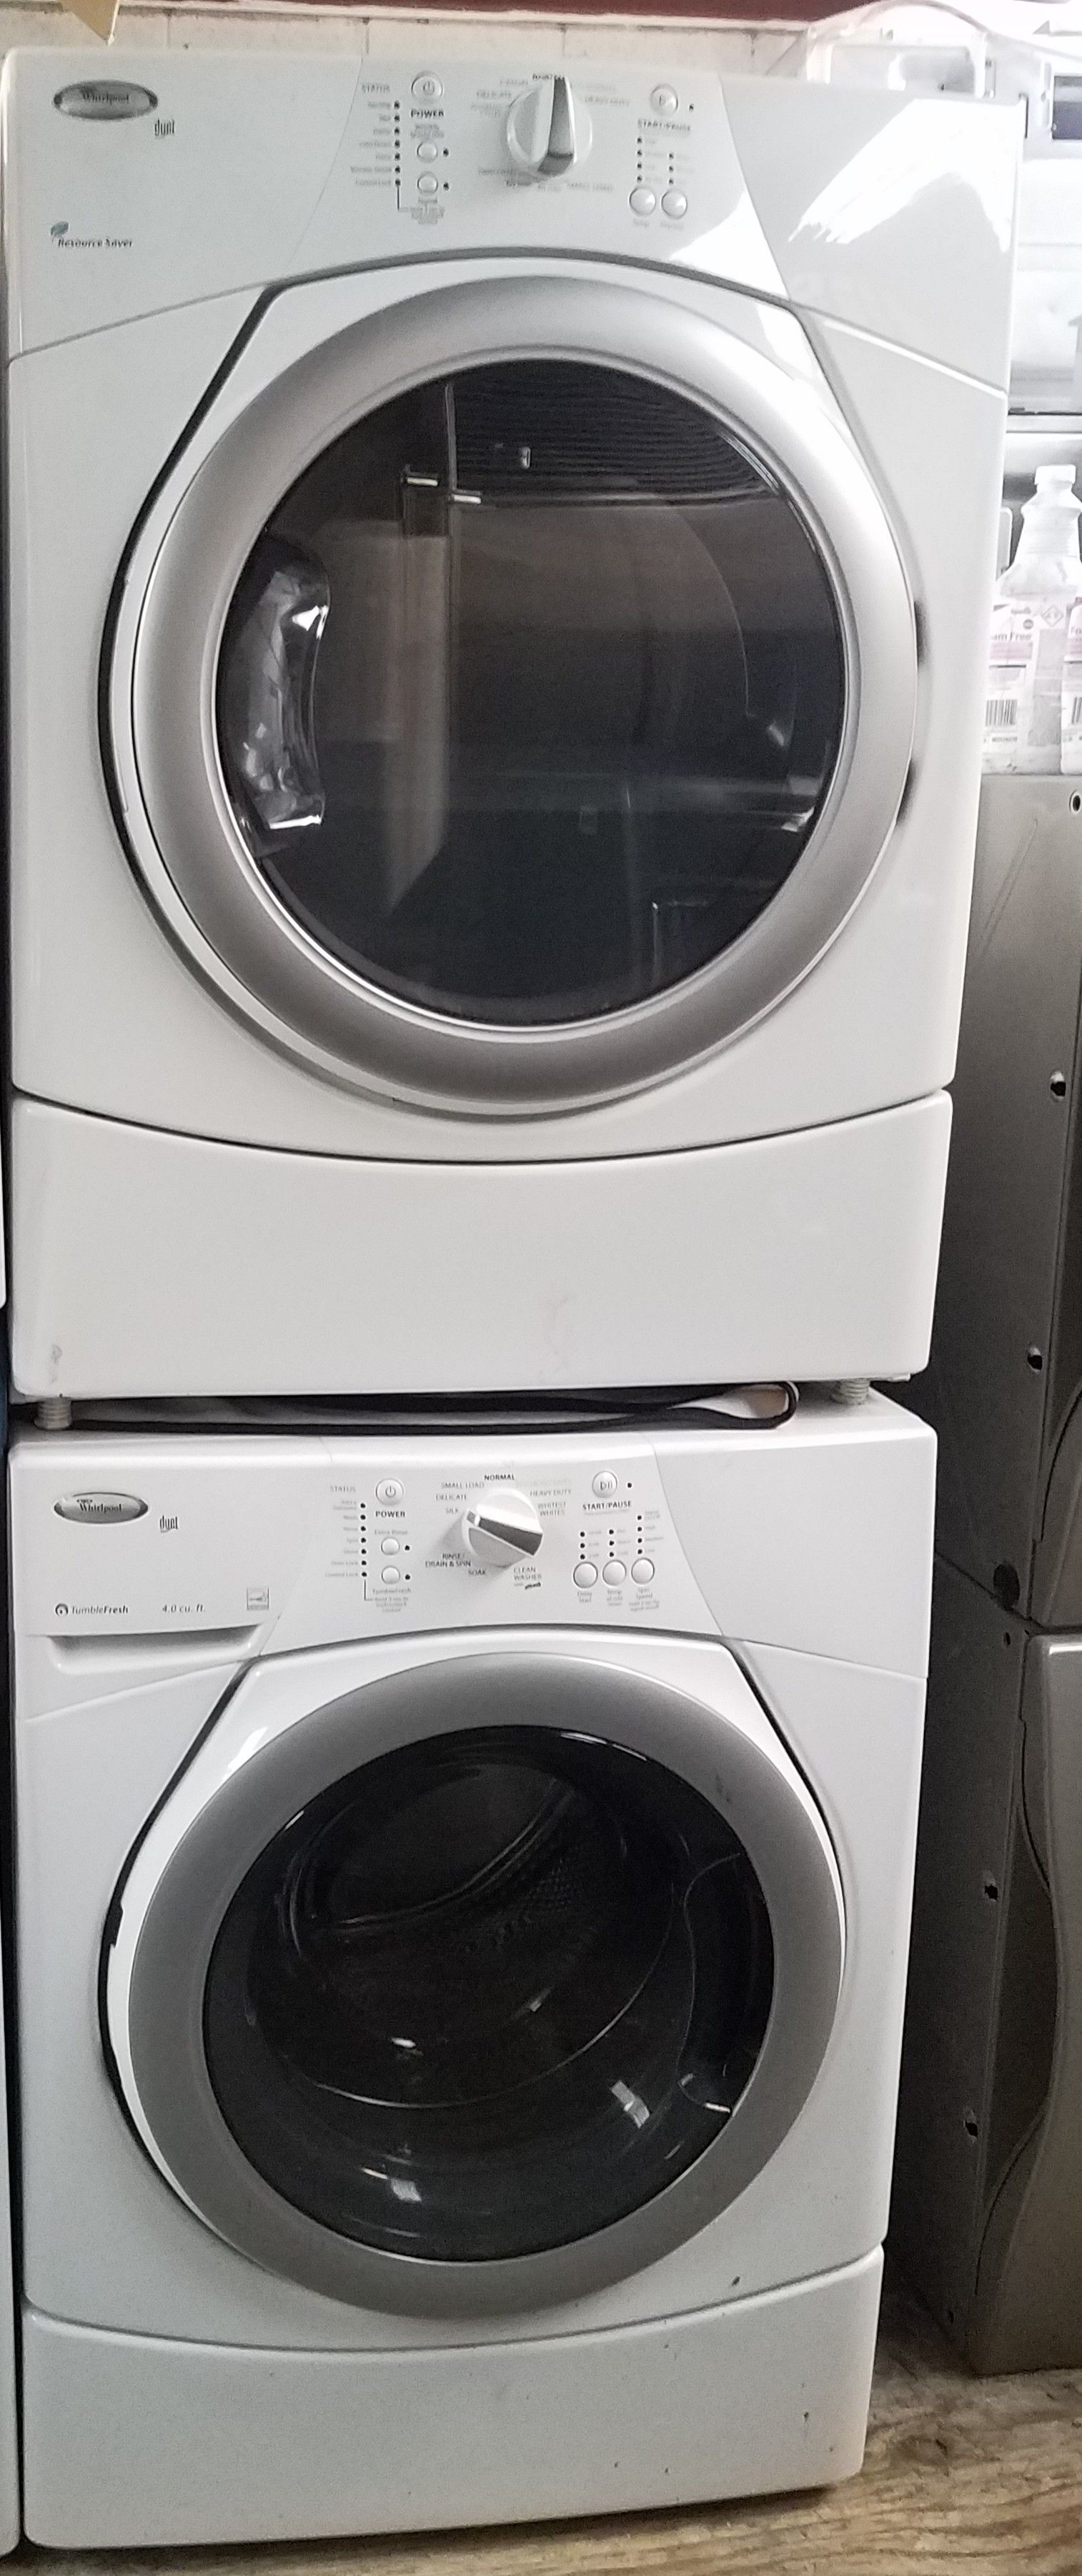 WHIRLPOOL DUE:FRONT LOAD GAS DRYER W WASHER.. 71INCHES H X 27WIDTH